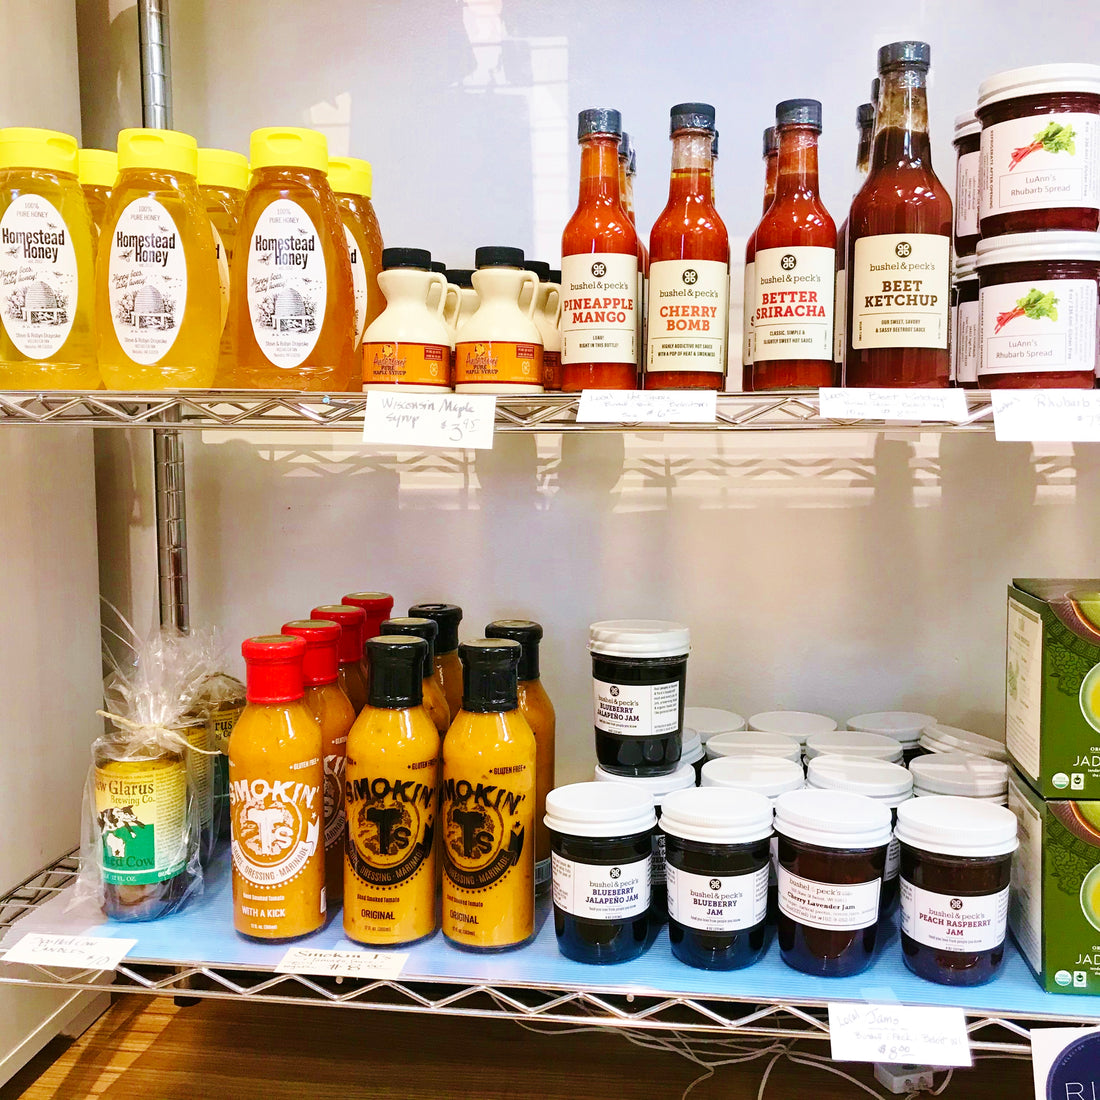 What’s New in the Pantry?